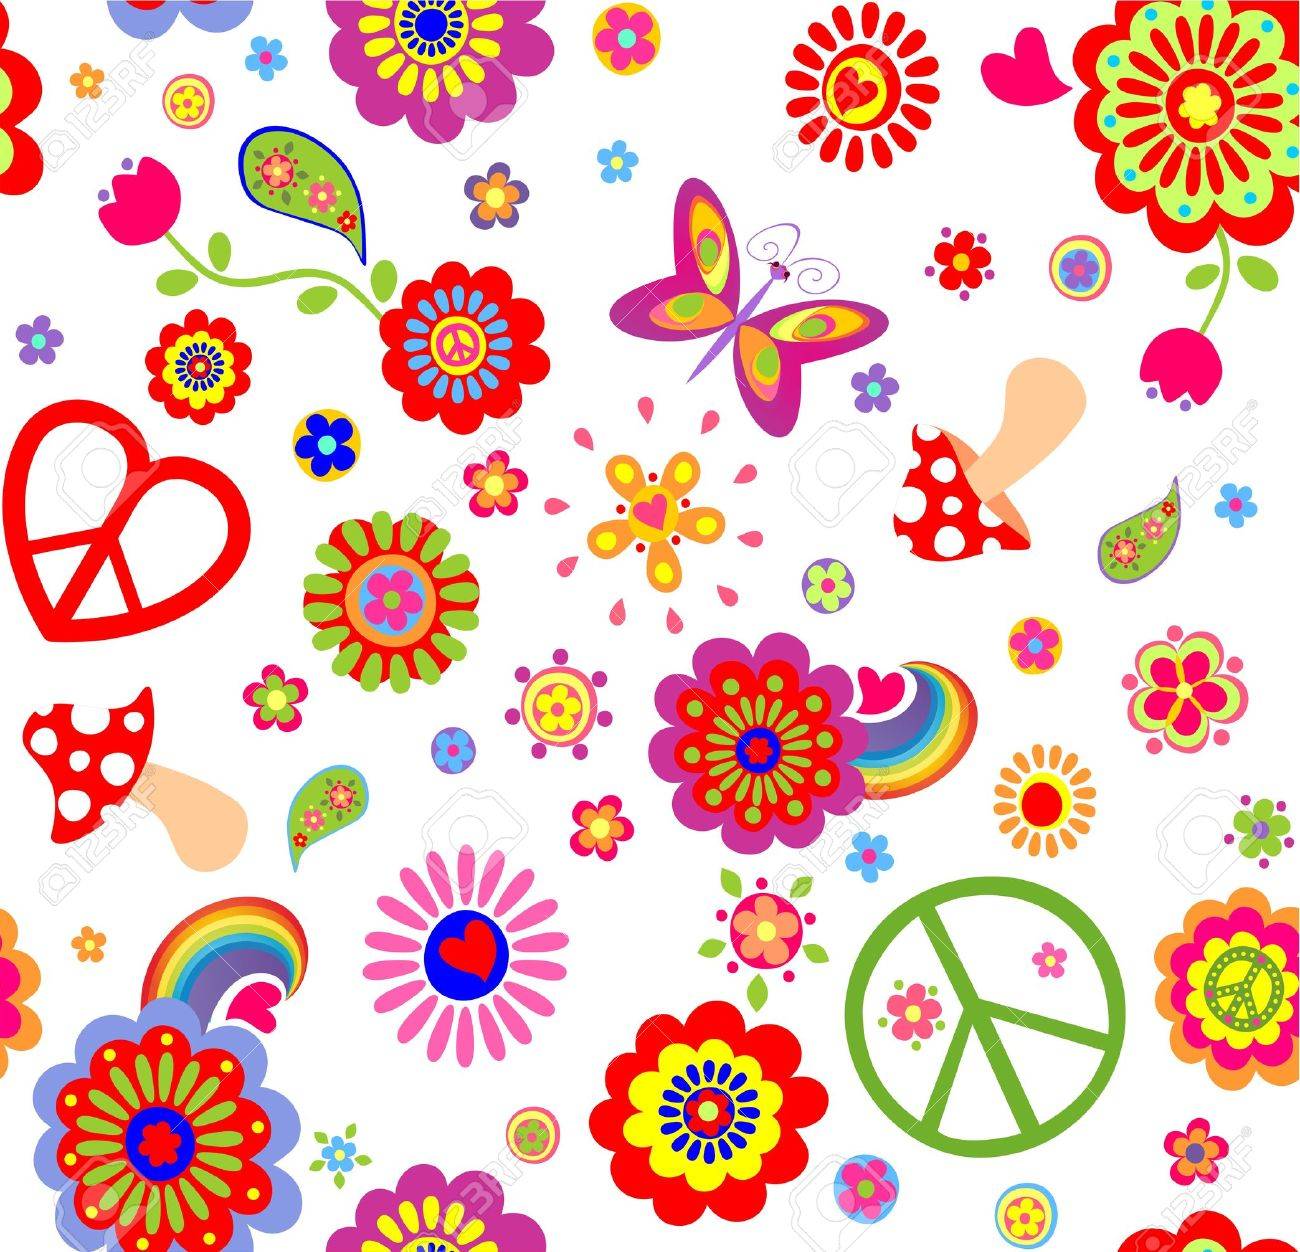 Hippie Childish Funny Wallpaper With Abstract Flowers Mushrooms